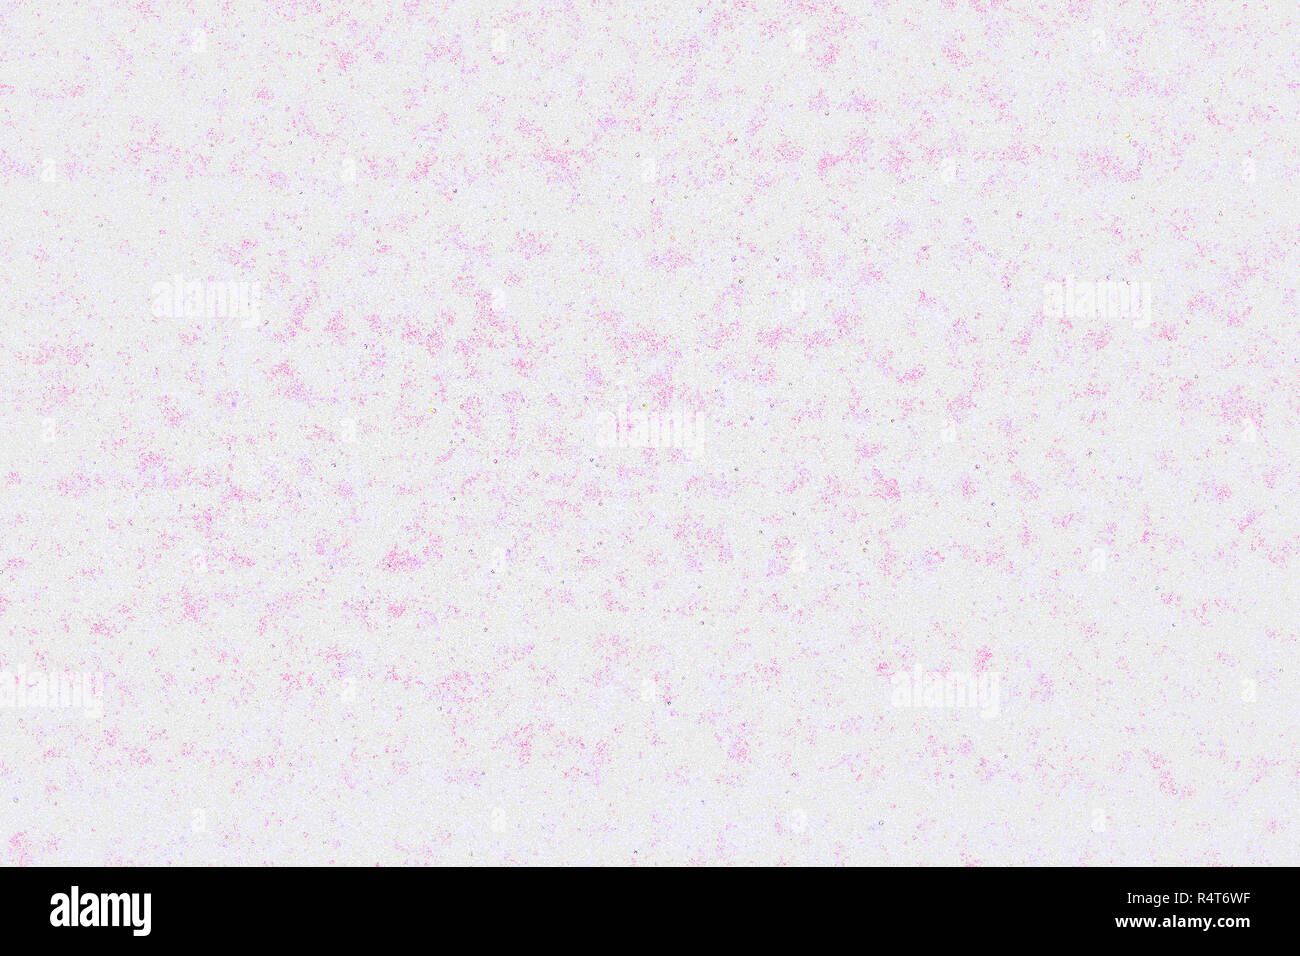 The texture of pink and white and yellow specks. Background image Stock Photo